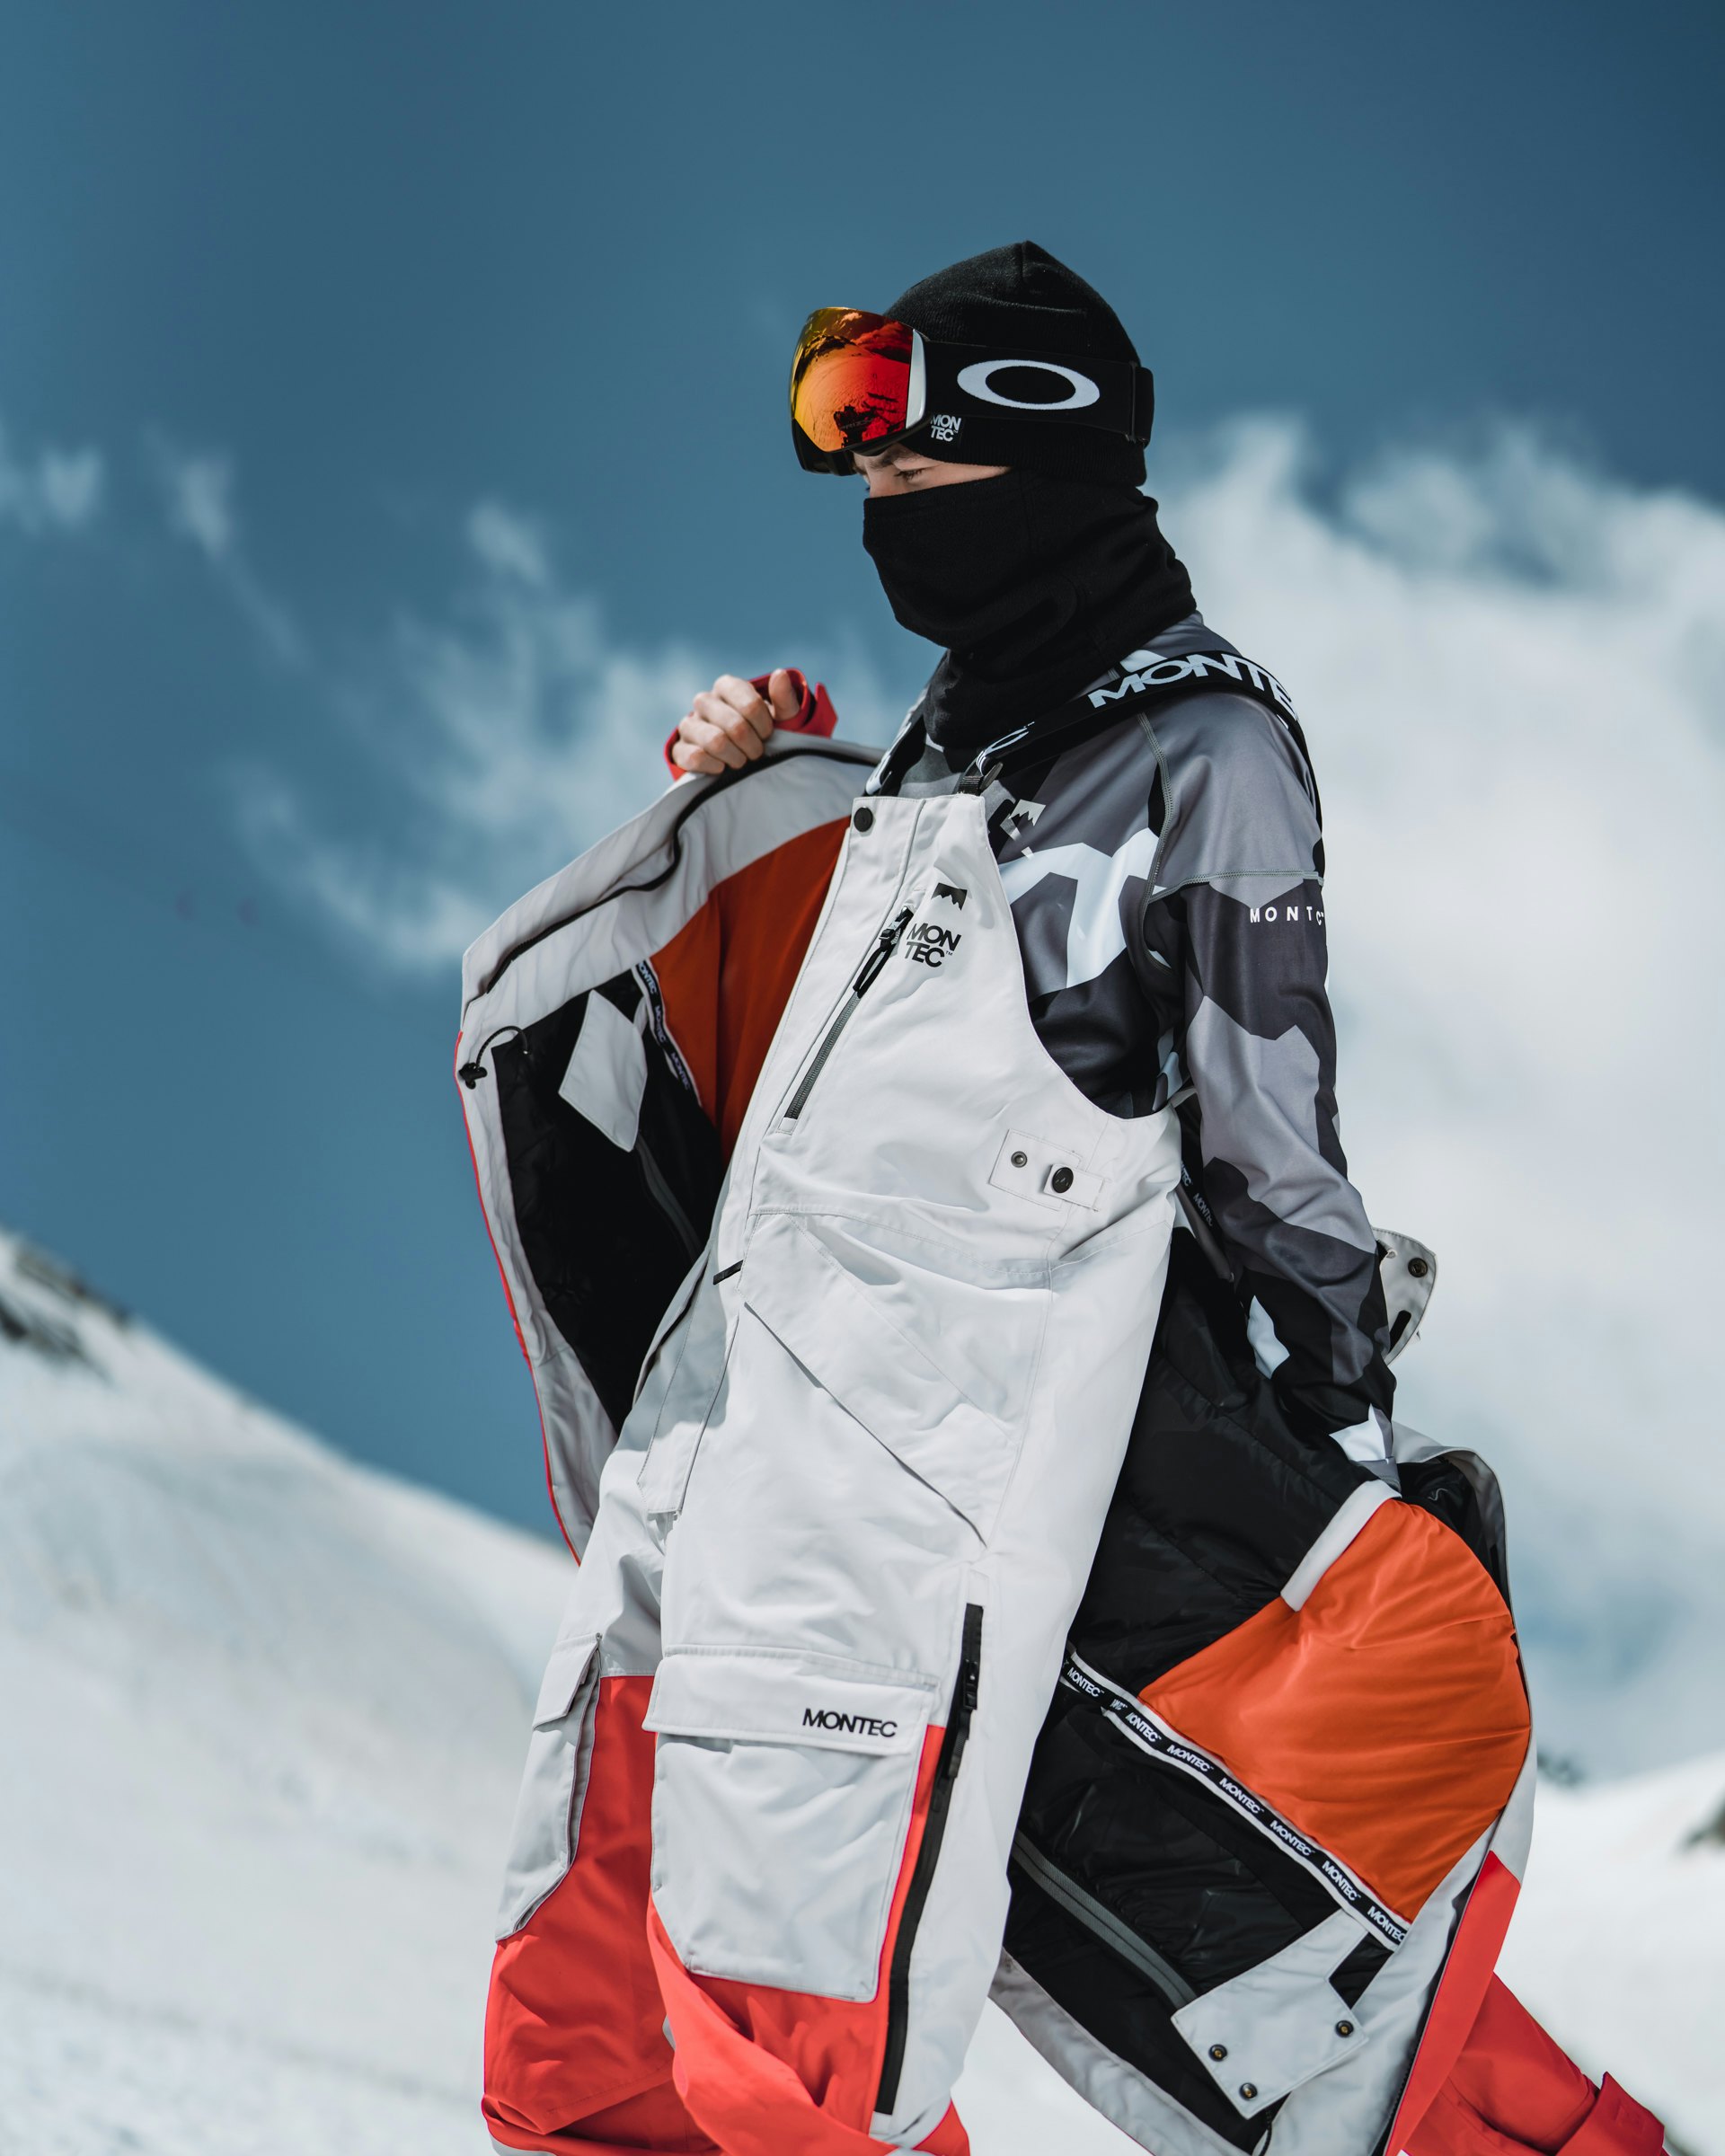 How To Fix Holes And Rips In Your Snow Gear